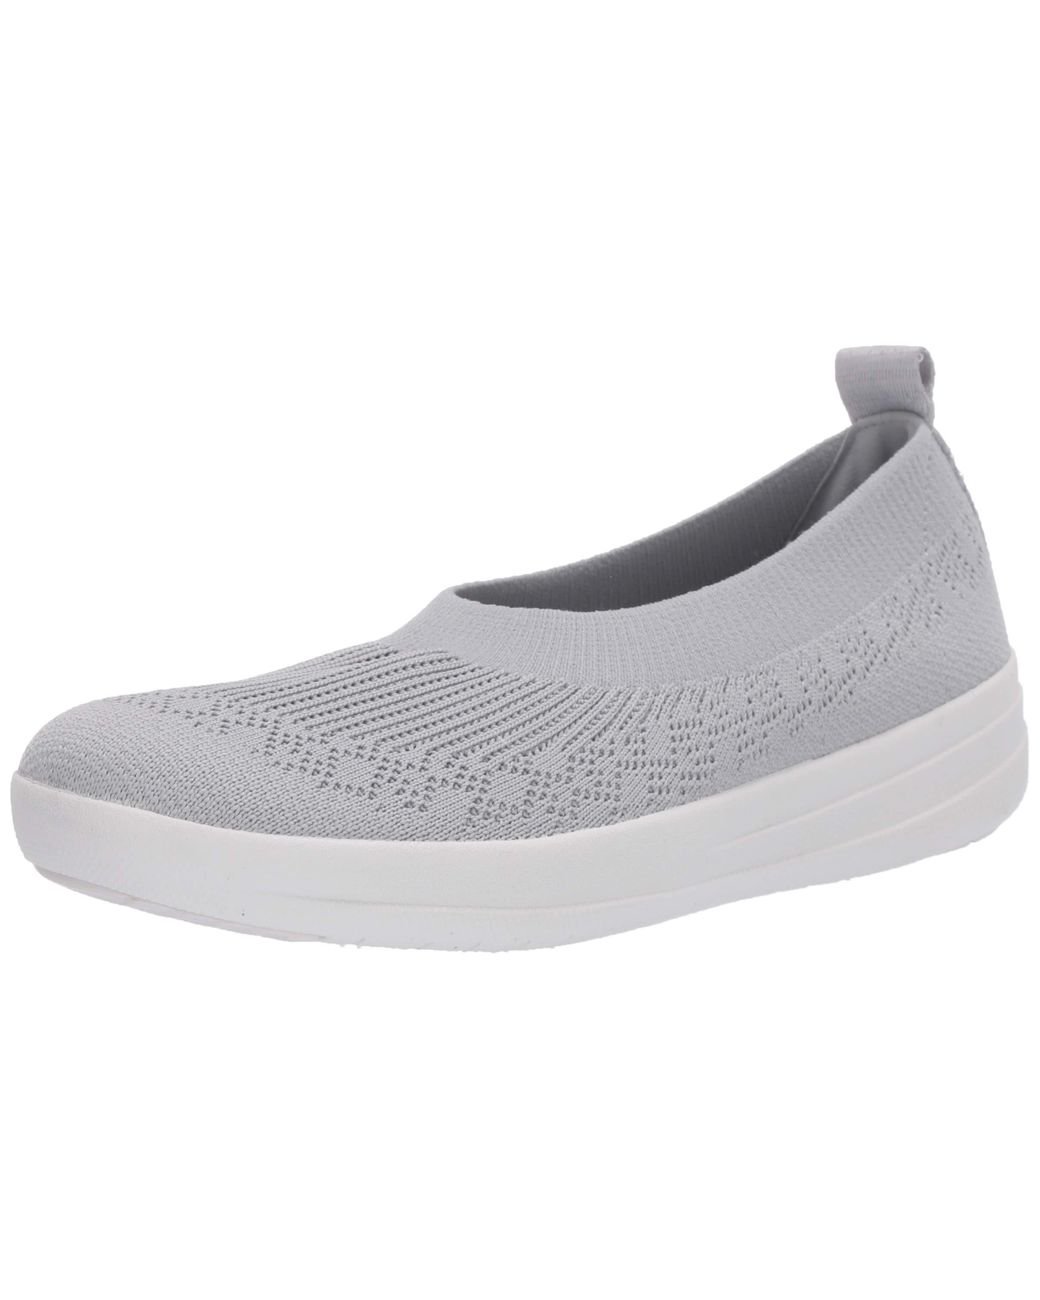 Fitflop Synthetic Uberknit Crystal Ballet Flats in Pearl (Gray) - Save ...